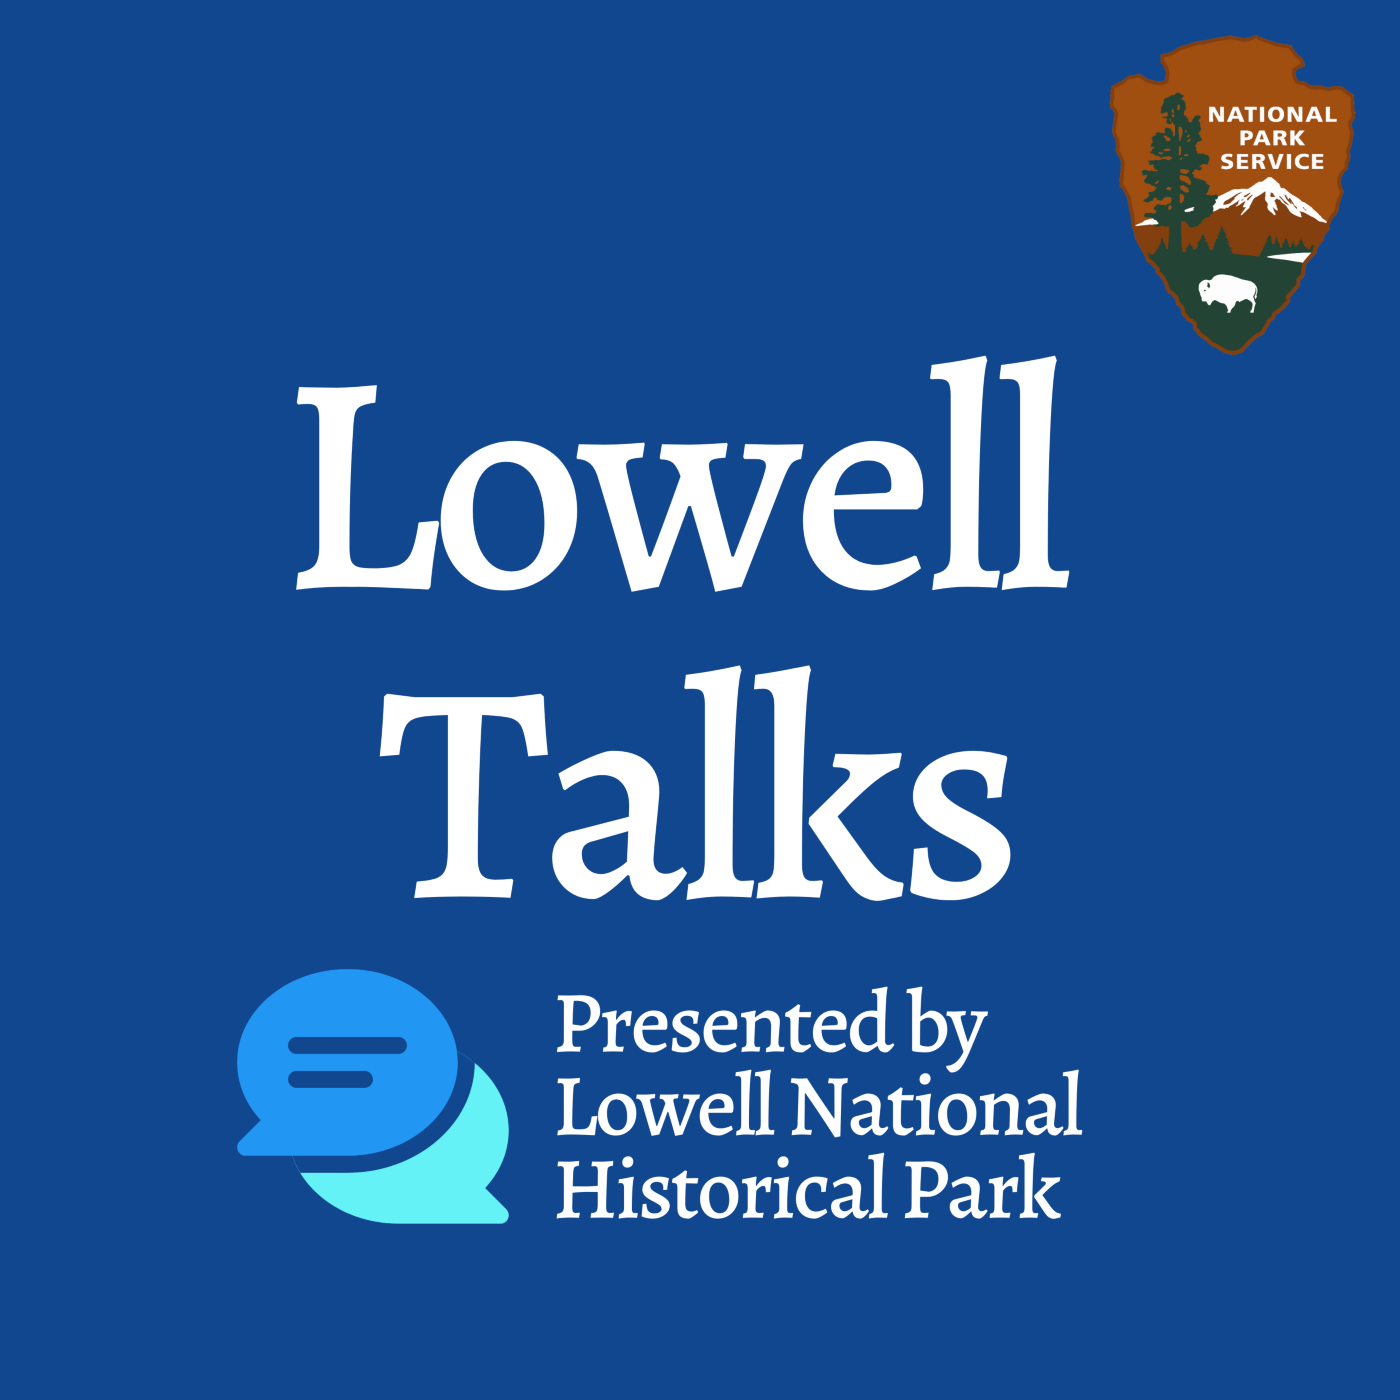 A logo that says "Lowell Talks - Presented by Lowell National Historical Park"